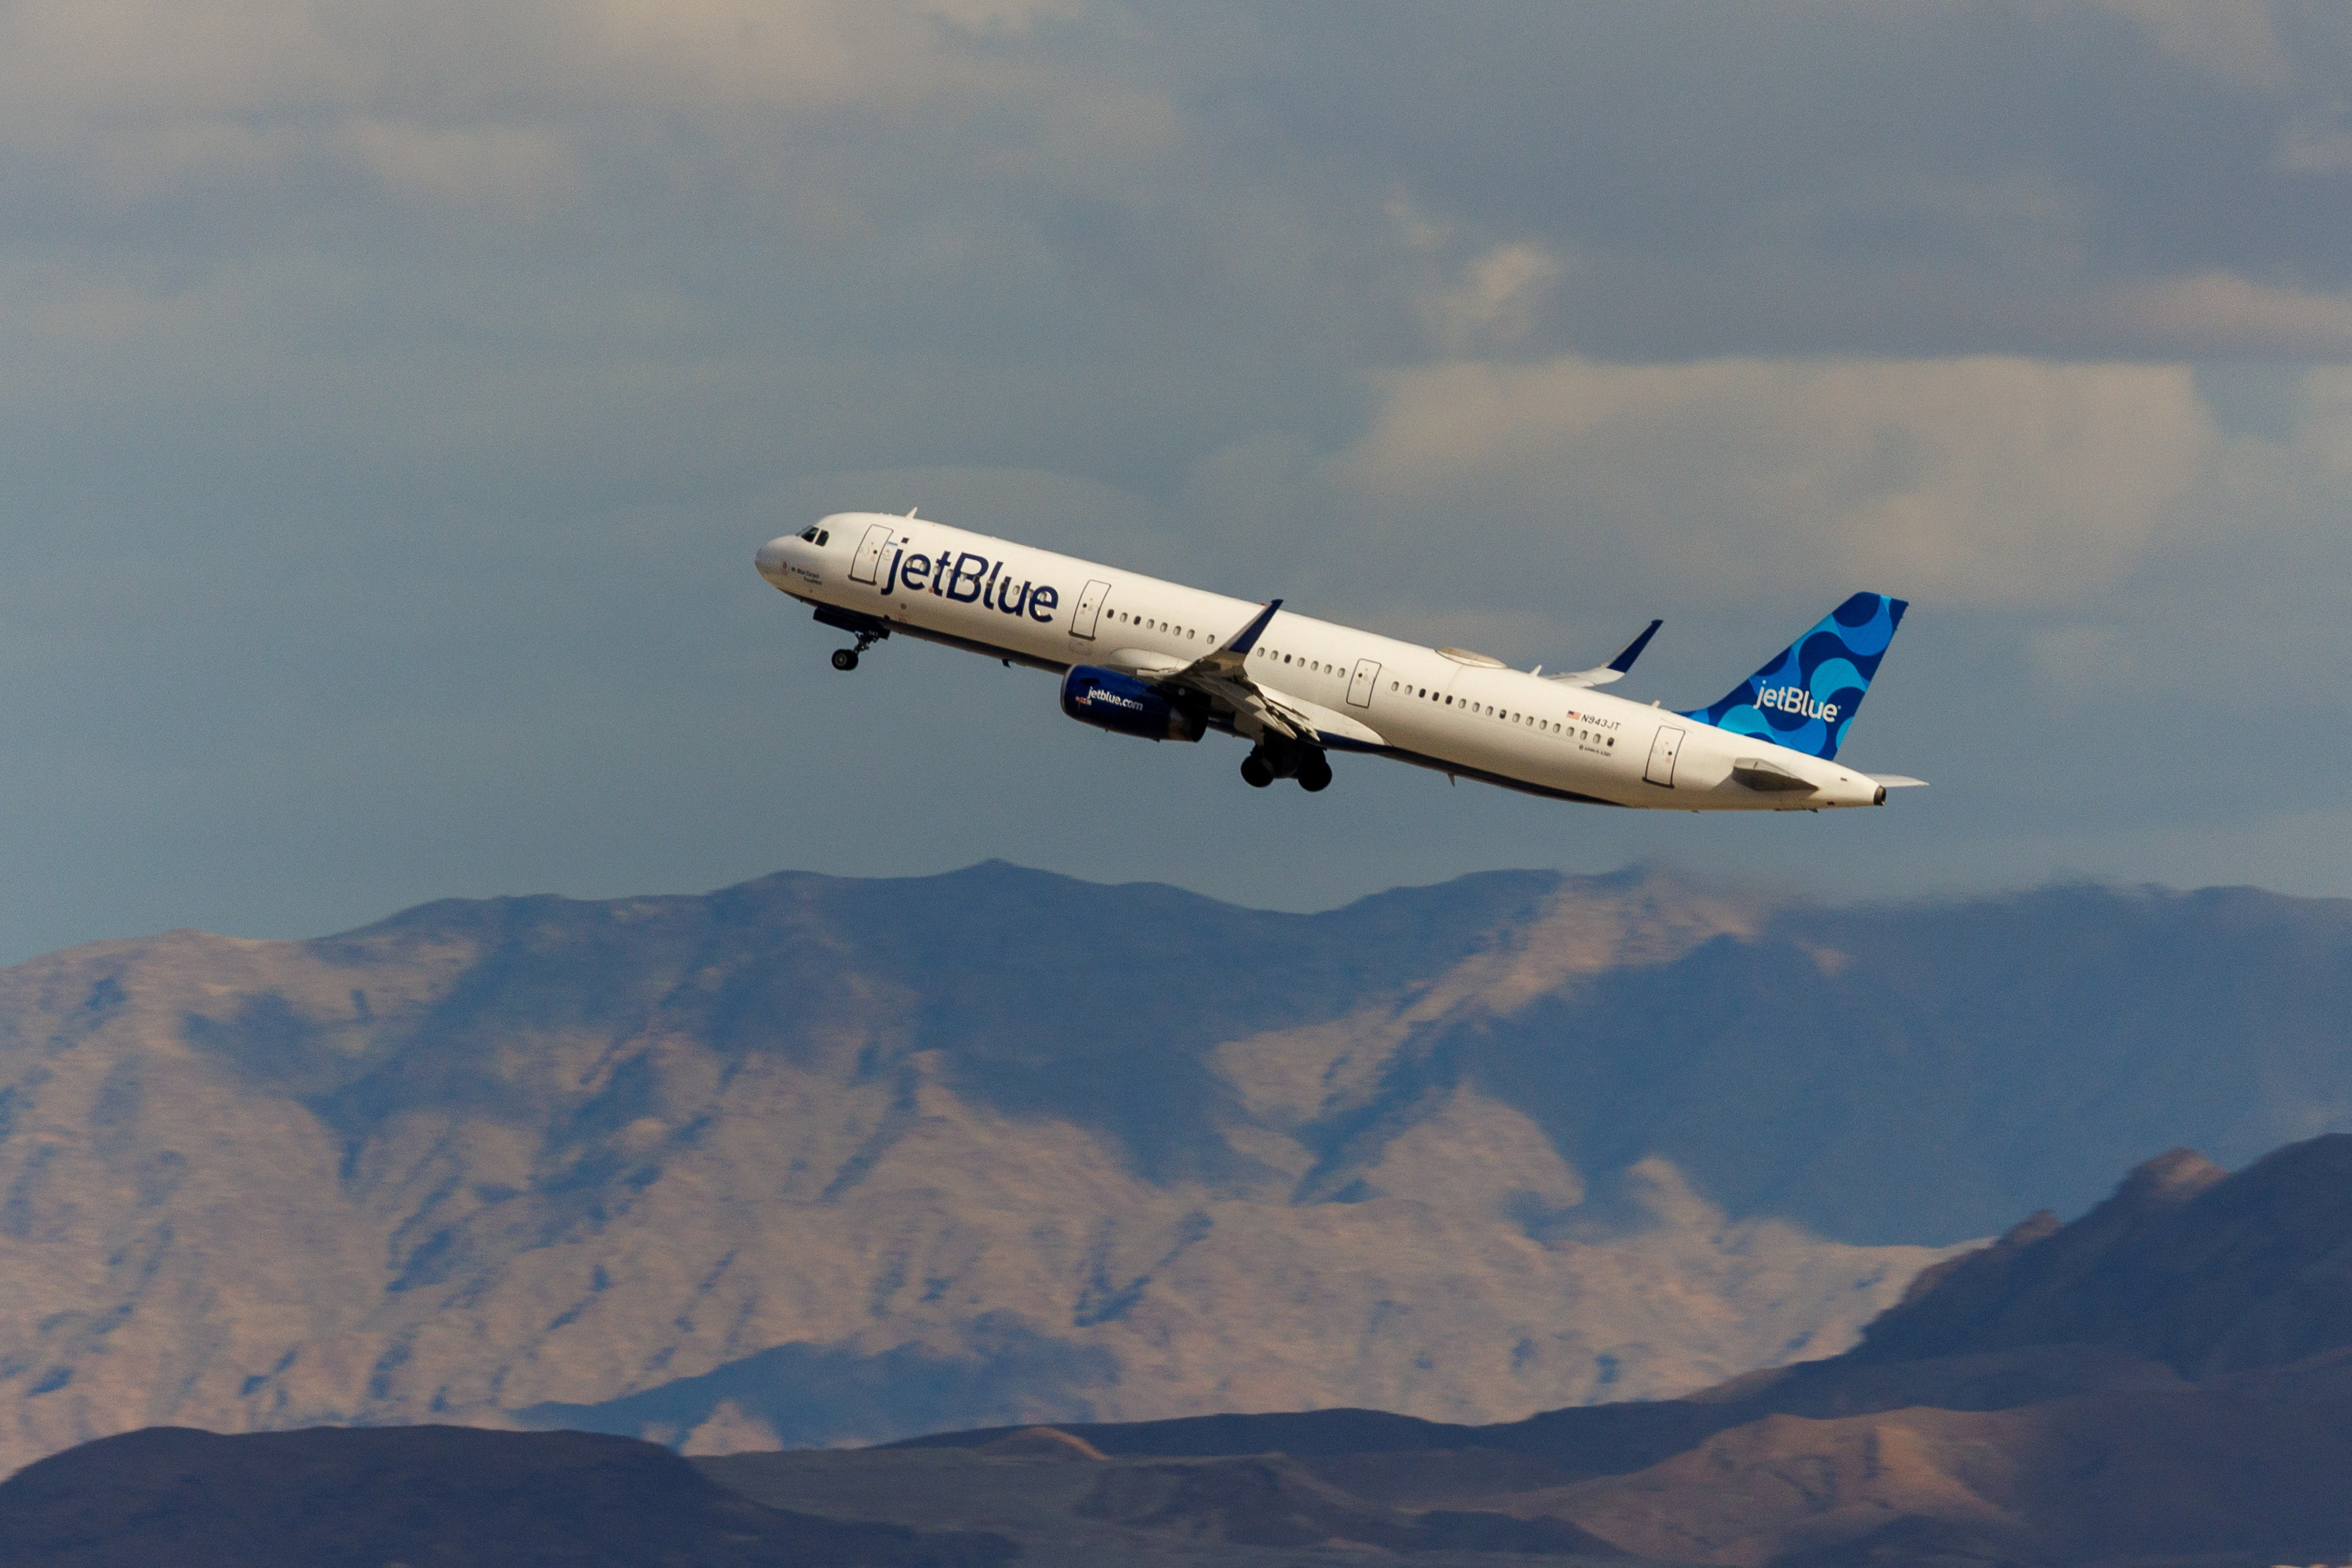 Jetblue commercial aircraft takes off from  Las Vegas